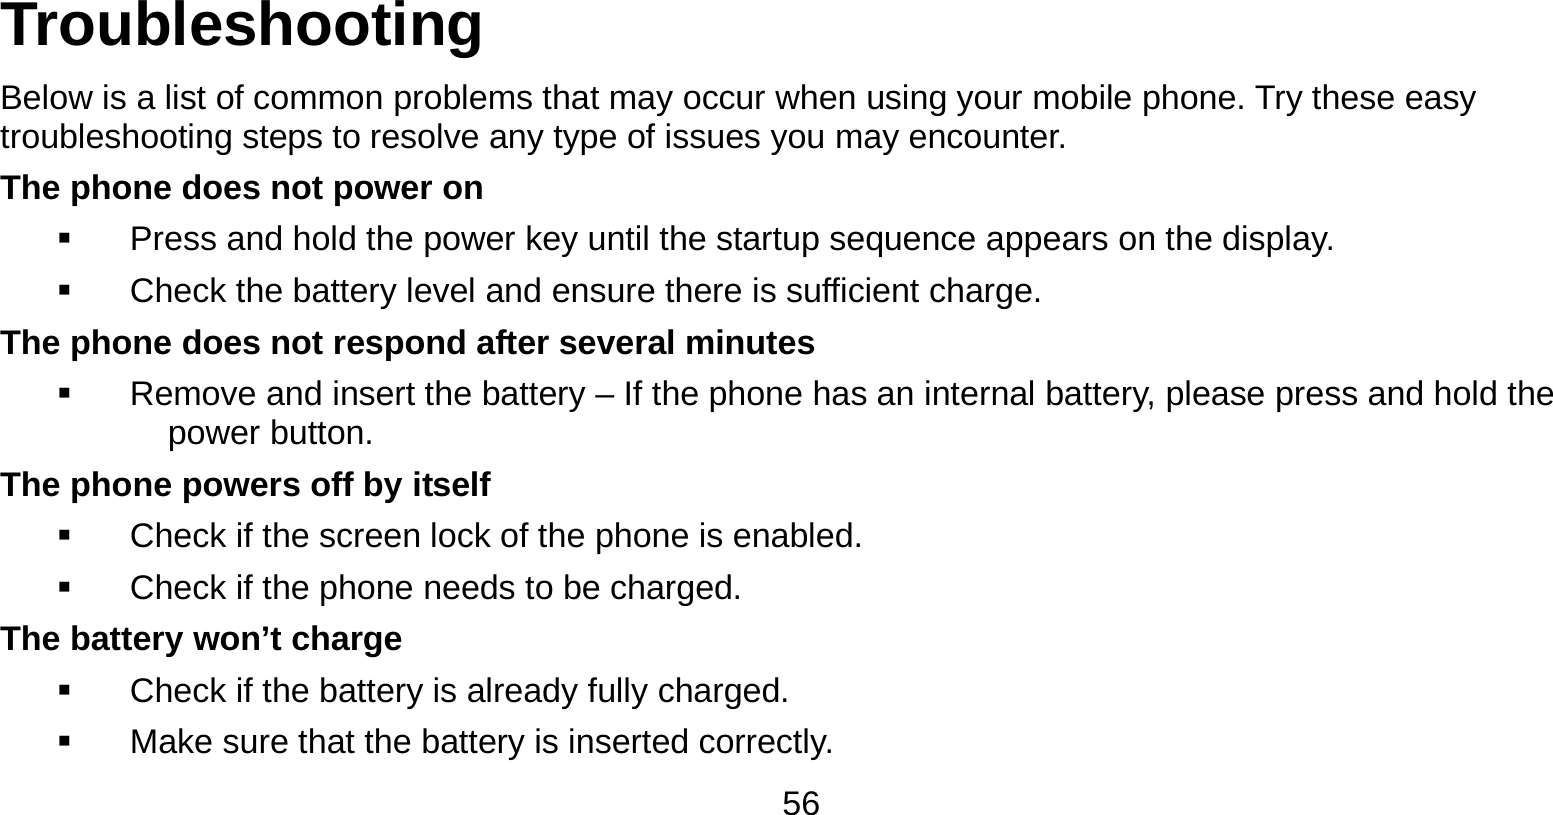   56 Troubleshooting Below is a list of common problems that may occur when using your mobile phone. Try these easy troubleshooting steps to resolve any type of issues you may encounter.   The phone does not power on   Press and hold the power key until the startup sequence appears on the display.   Check the battery level and ensure there is sufficient charge. The phone does not respond after several minutes   Remove and insert the battery – If the phone has an internal battery, please press and hold the power button. The phone powers off by itself   Check if the screen lock of the phone is enabled.   Check if the phone needs to be charged. The battery won’t charge   Check if the battery is already fully charged.   Make sure that the battery is inserted correctly.   